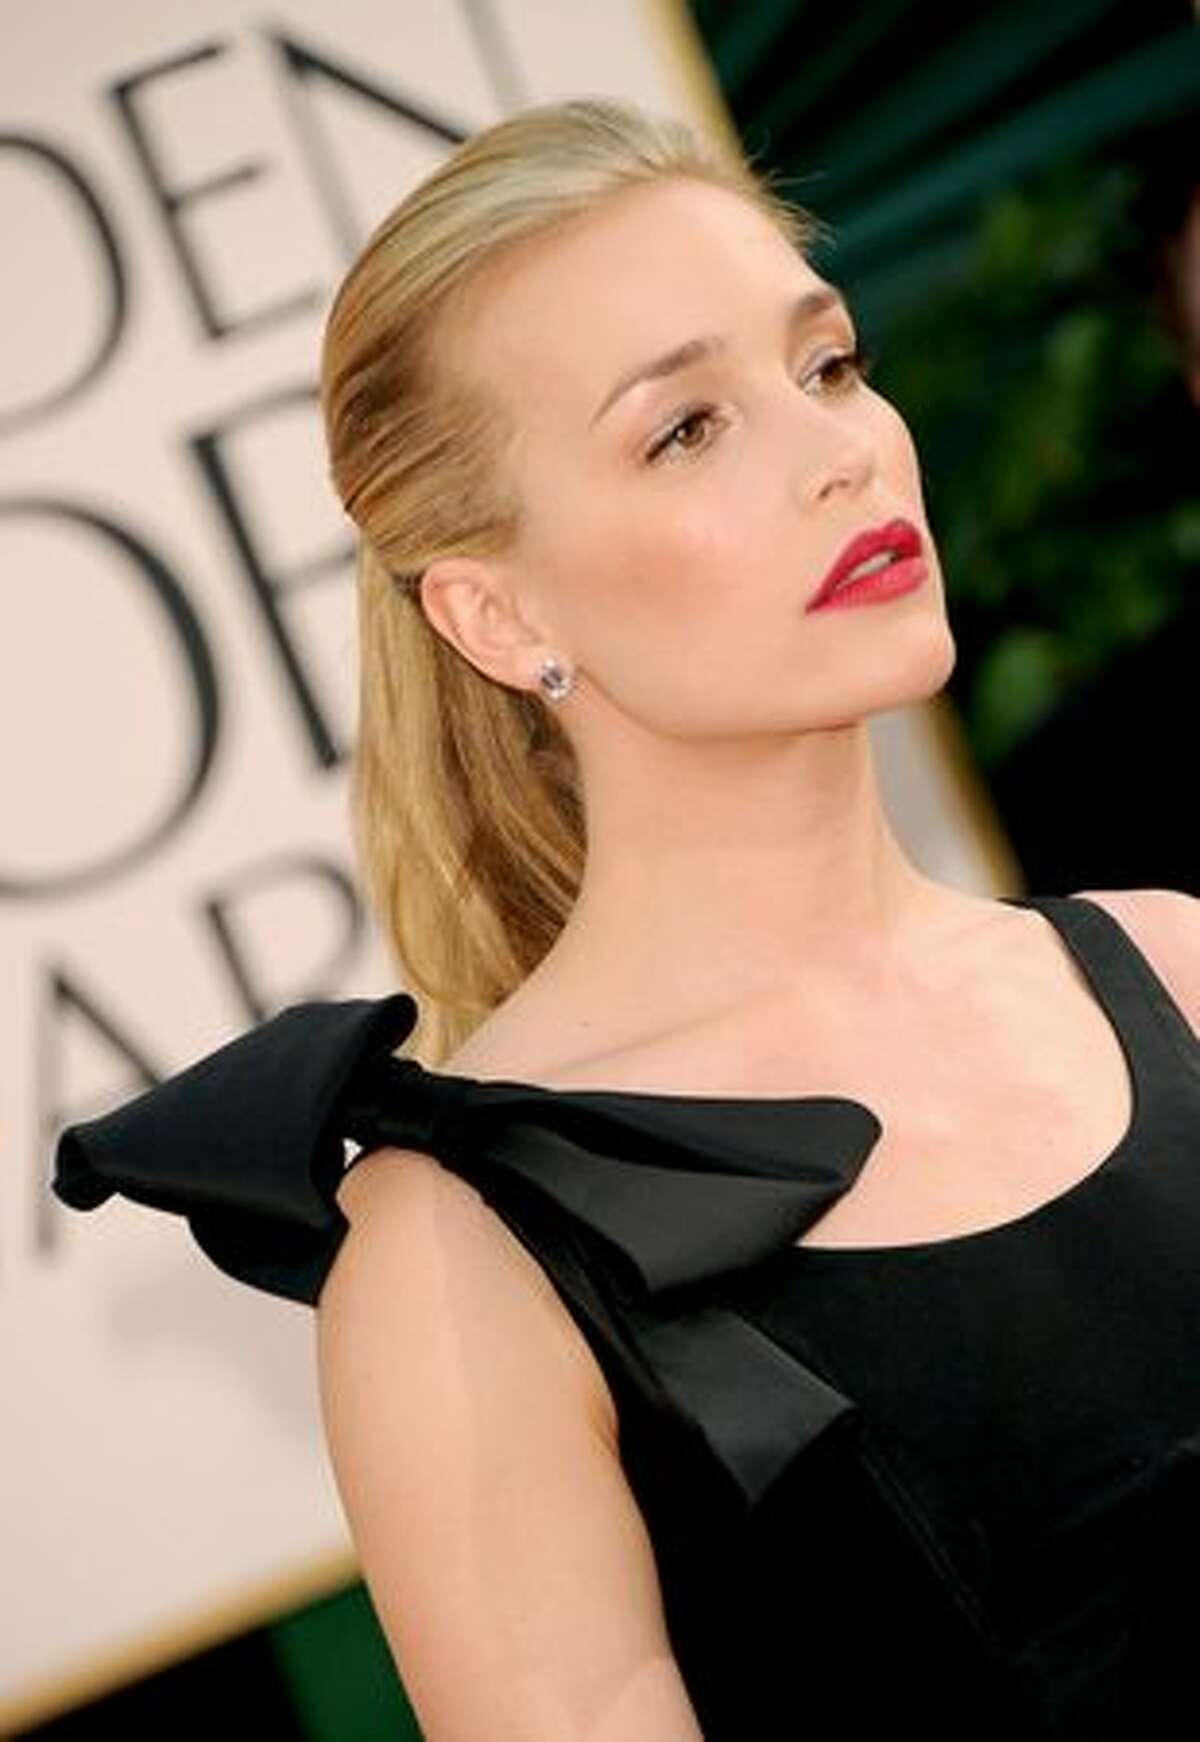 Someone save Piper Perabo (remember "Coyote Ugly"?) from the huge bow threatening to eat her right shoulder. By the way, Piper, huge bows went out of style (thankfully) two or three years ago, We were sorry you reminded us they were ever in style.